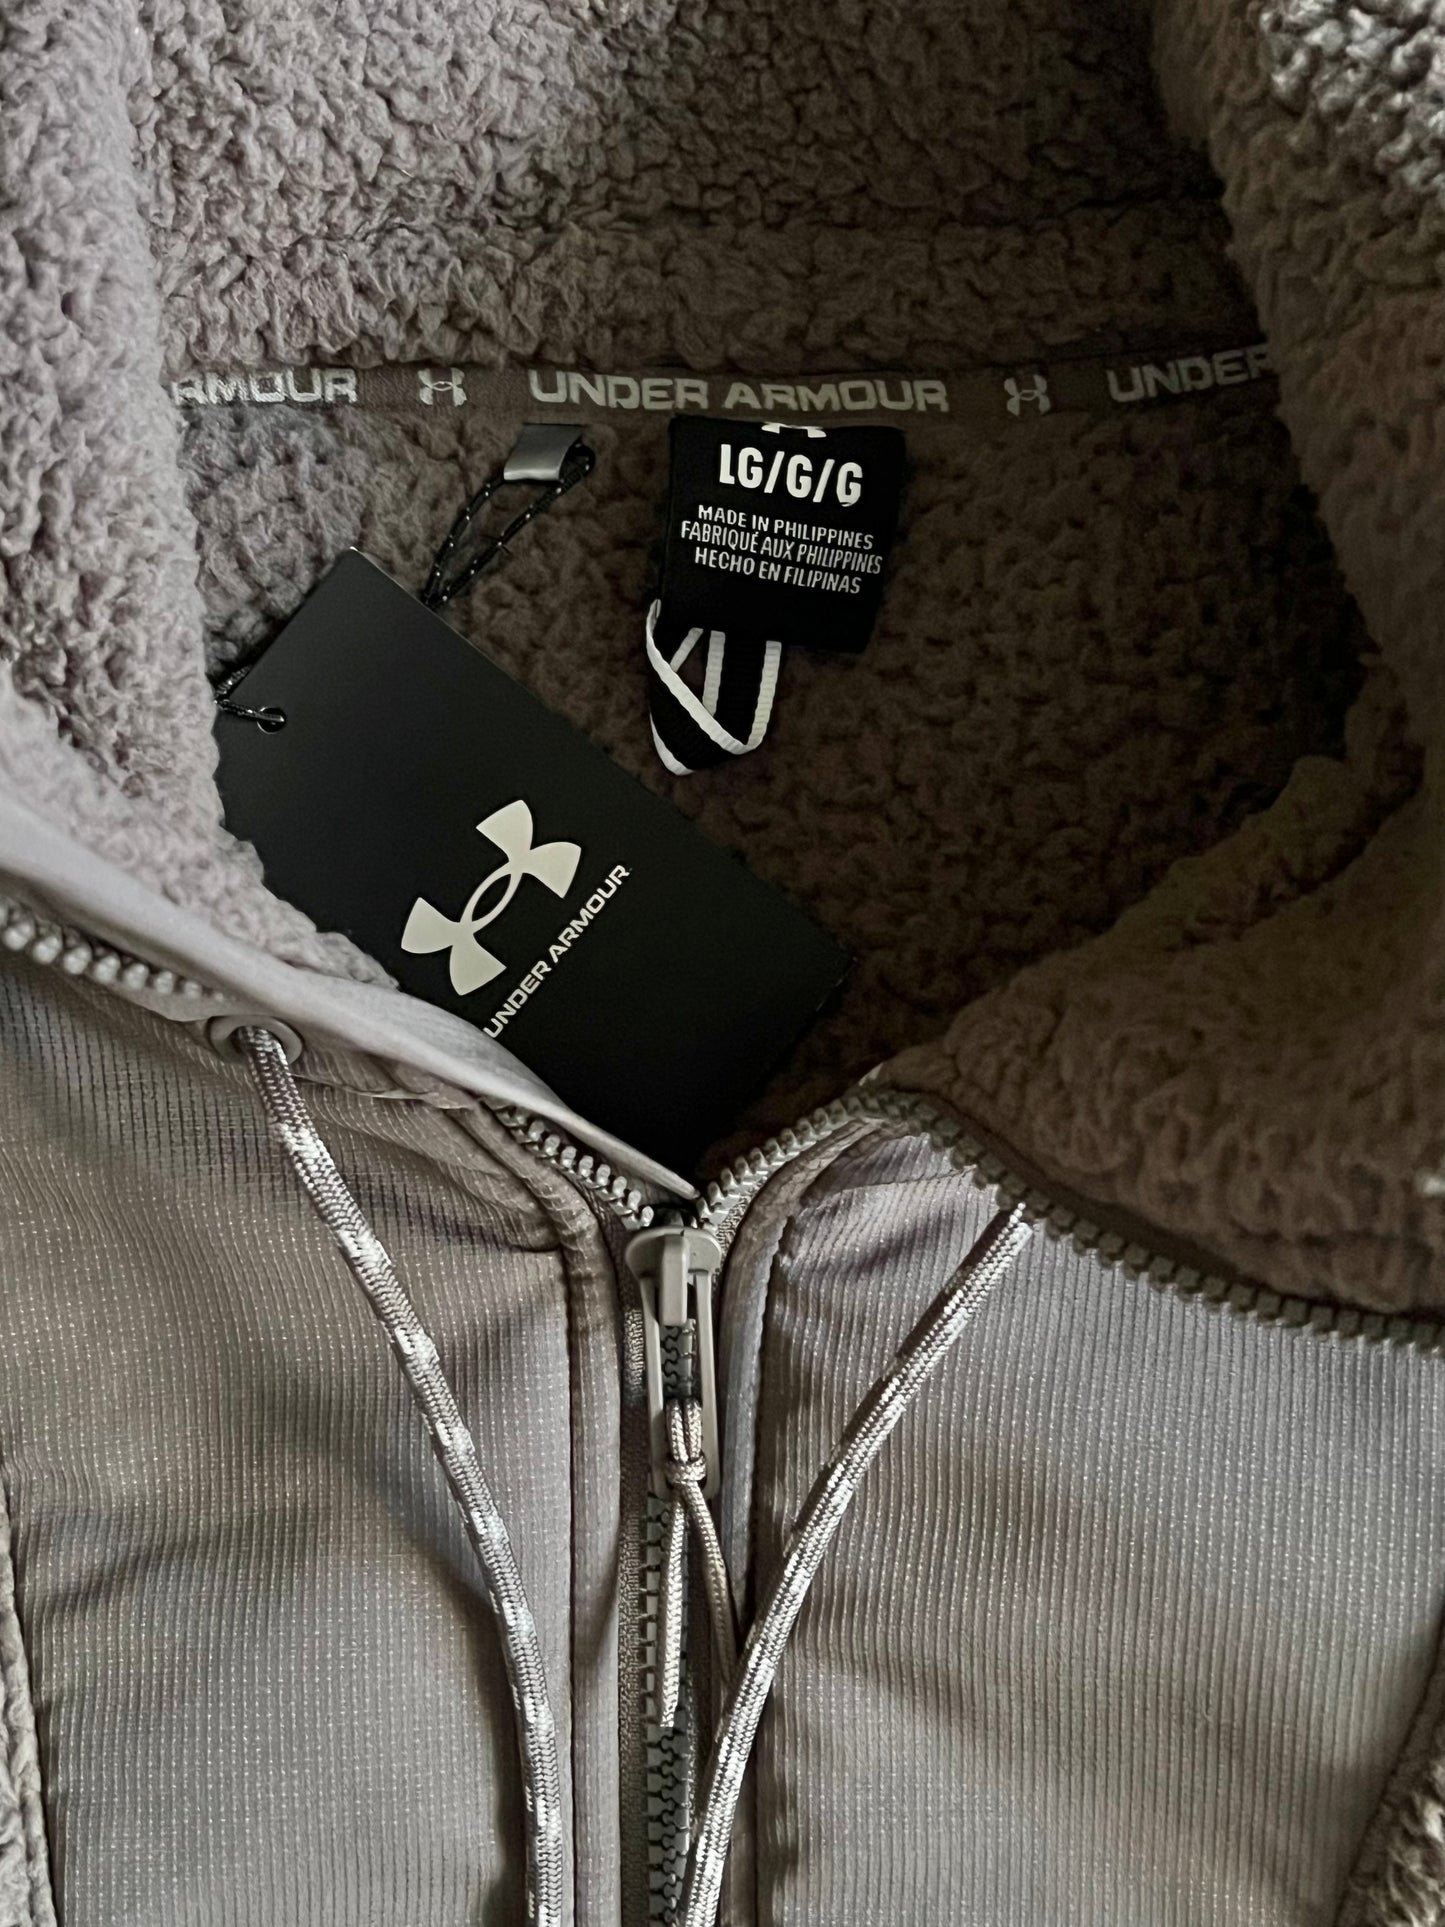 Under Armour Size L Gray Legacy Sherpa Full Zip Jacket